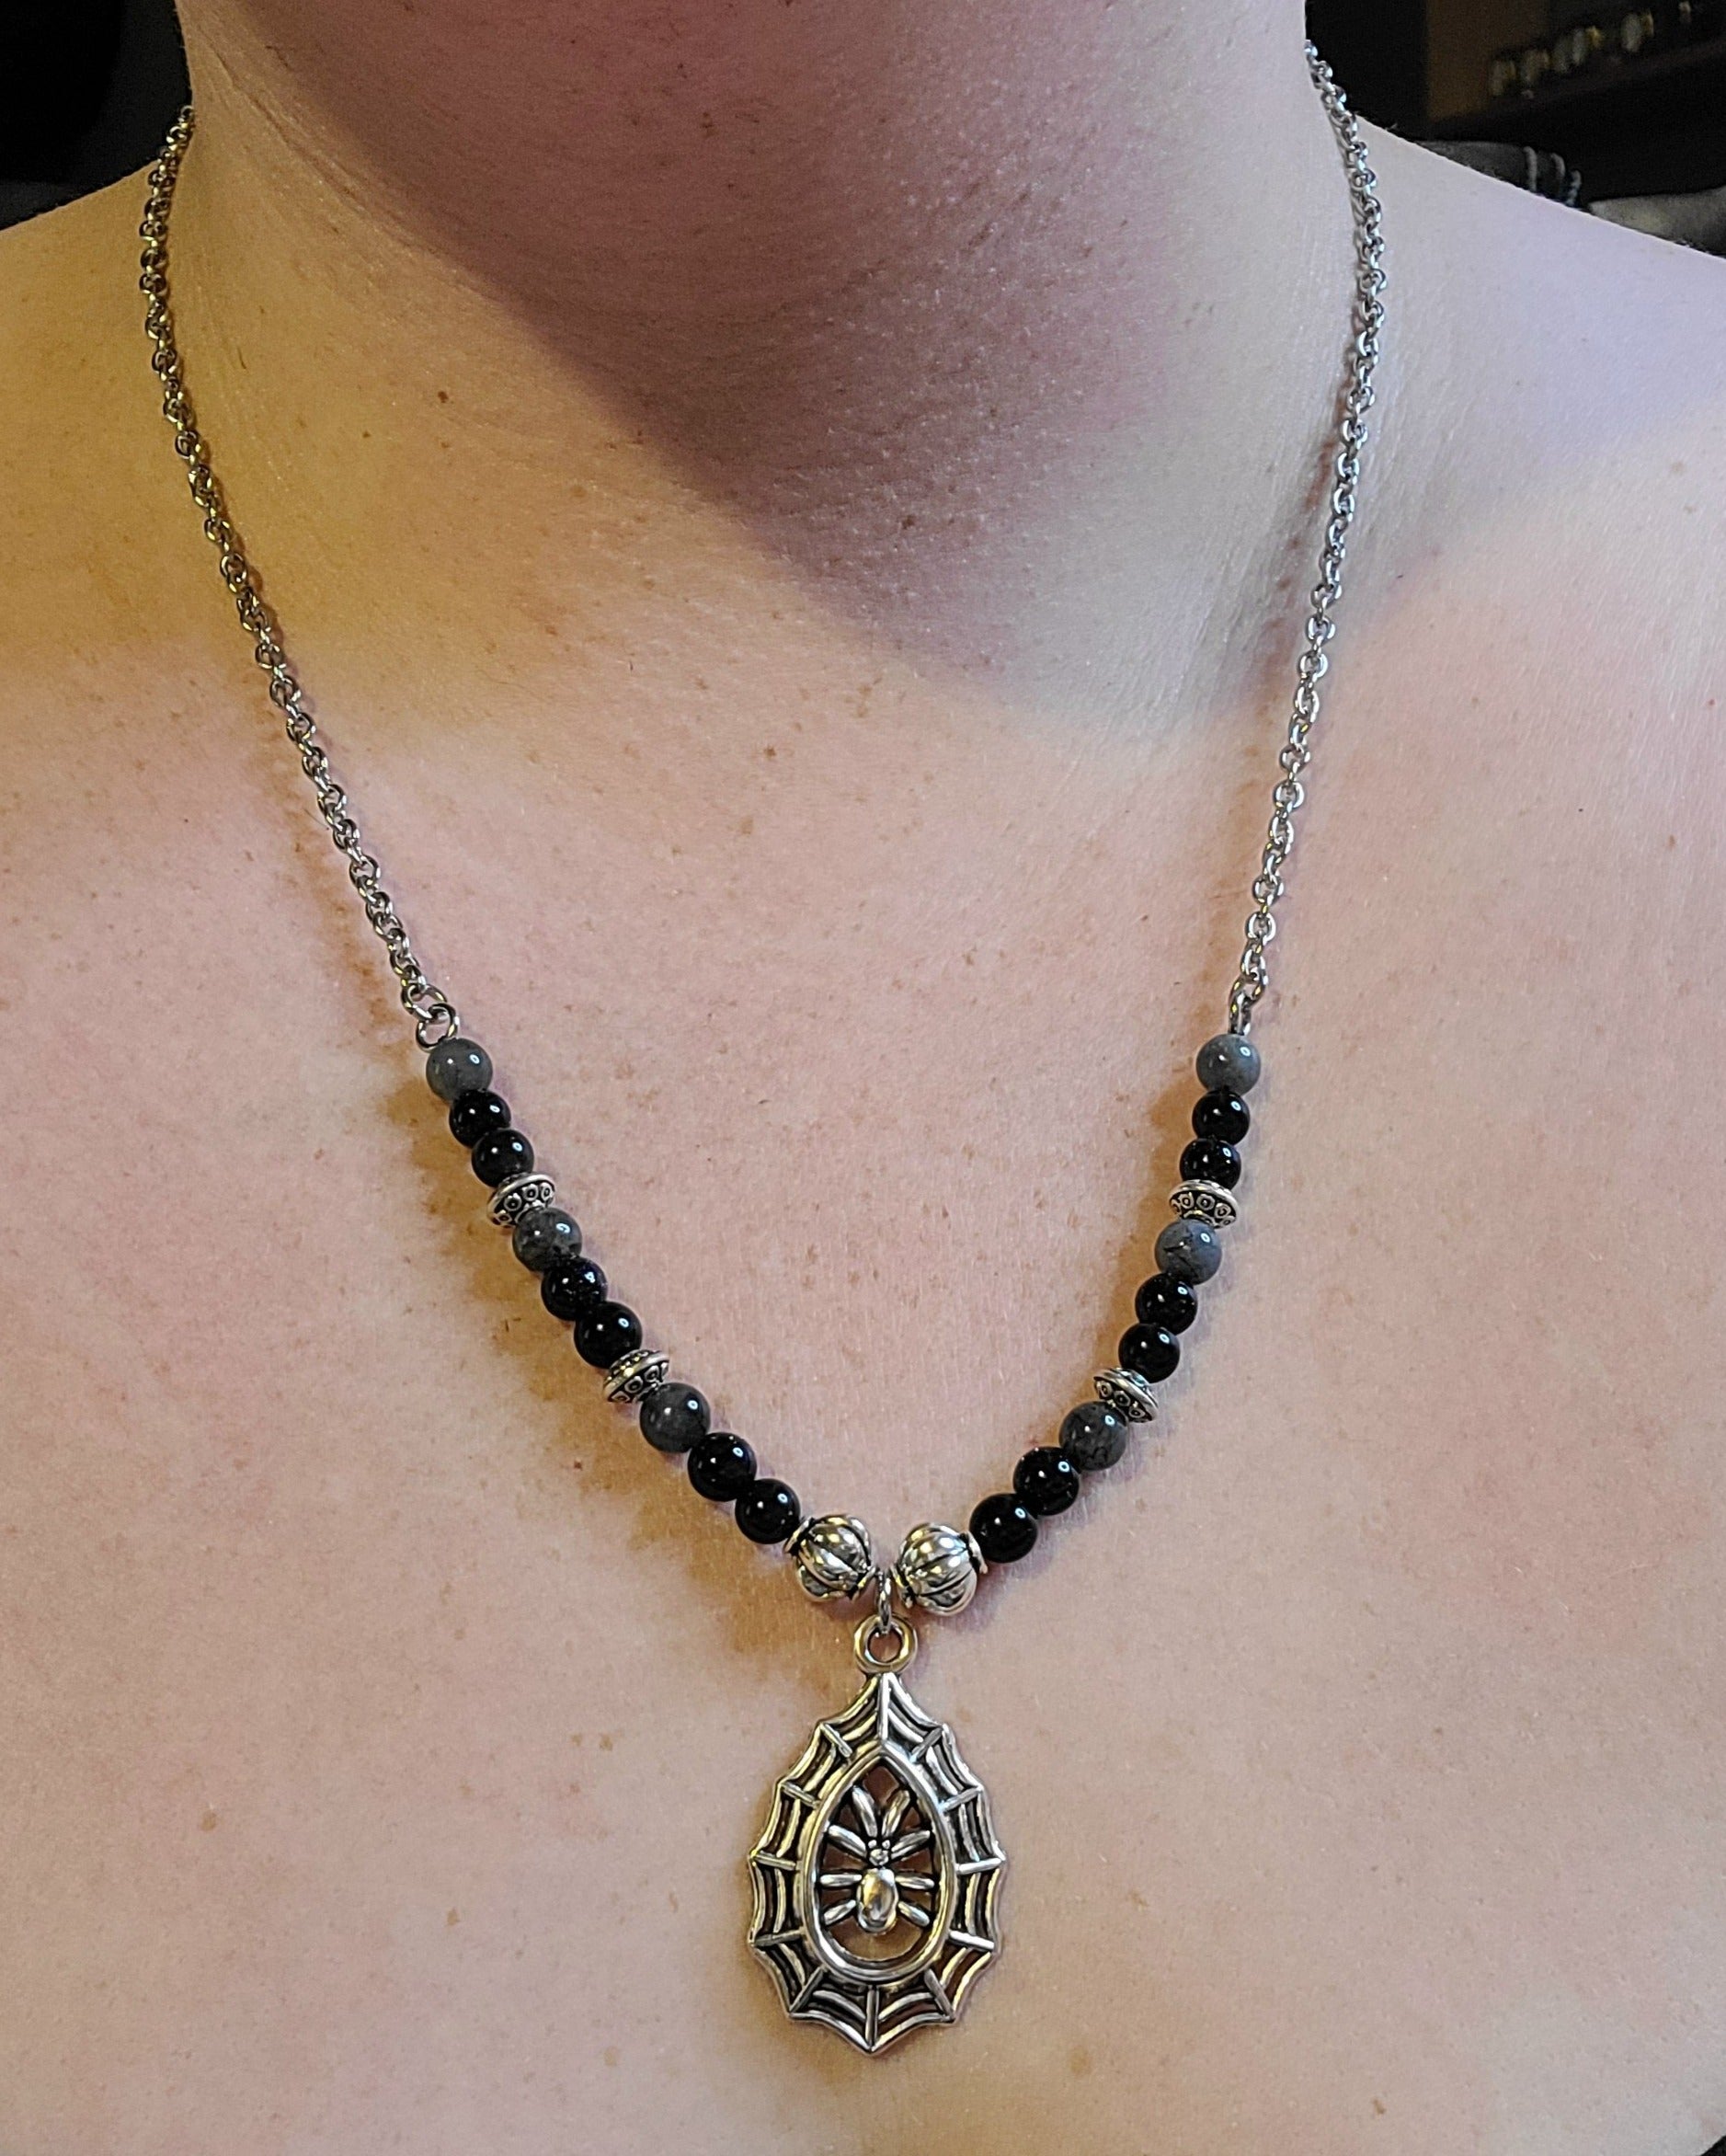 Spider Charm Necklace with Crystal Beads